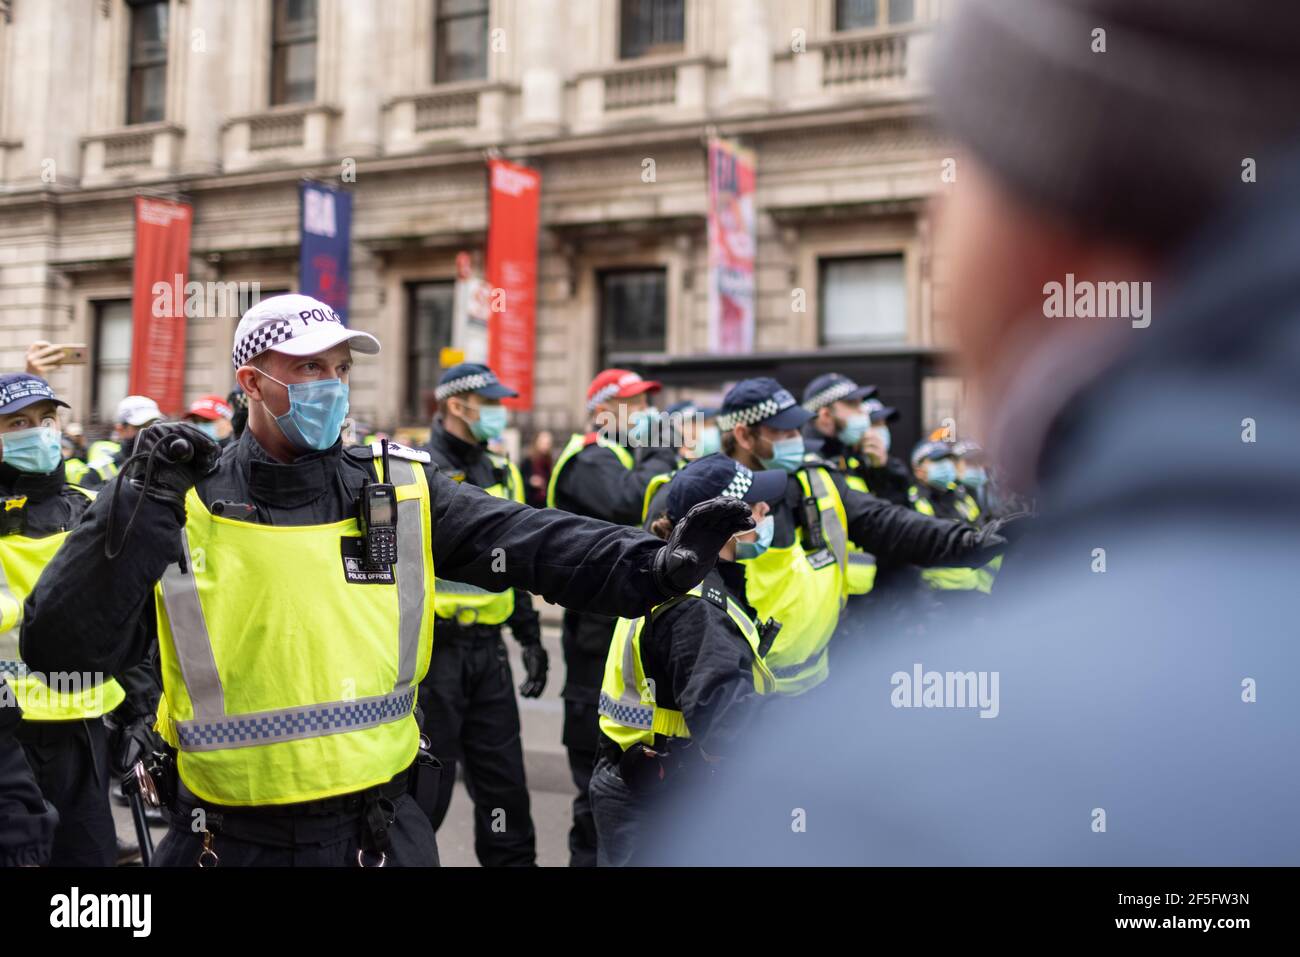 Anti-lockdown and anti Covid-19 vaccination protest, London, 20 March 2021. Confrontation between police and protesters. Stock Photo